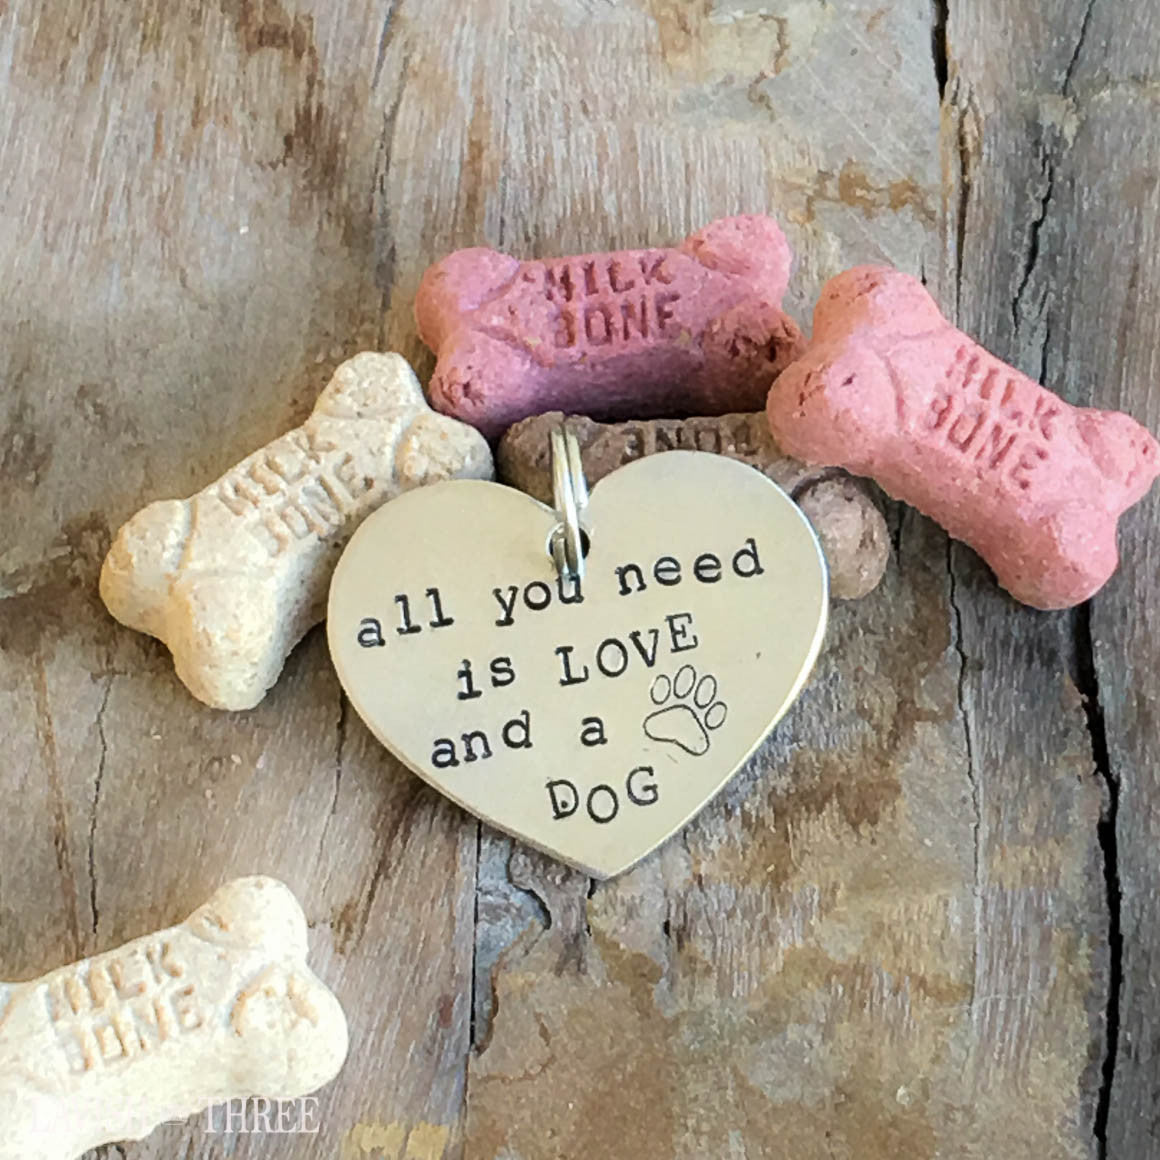 All you need is love and a dog, hand stamped pet tag Lavish three 3